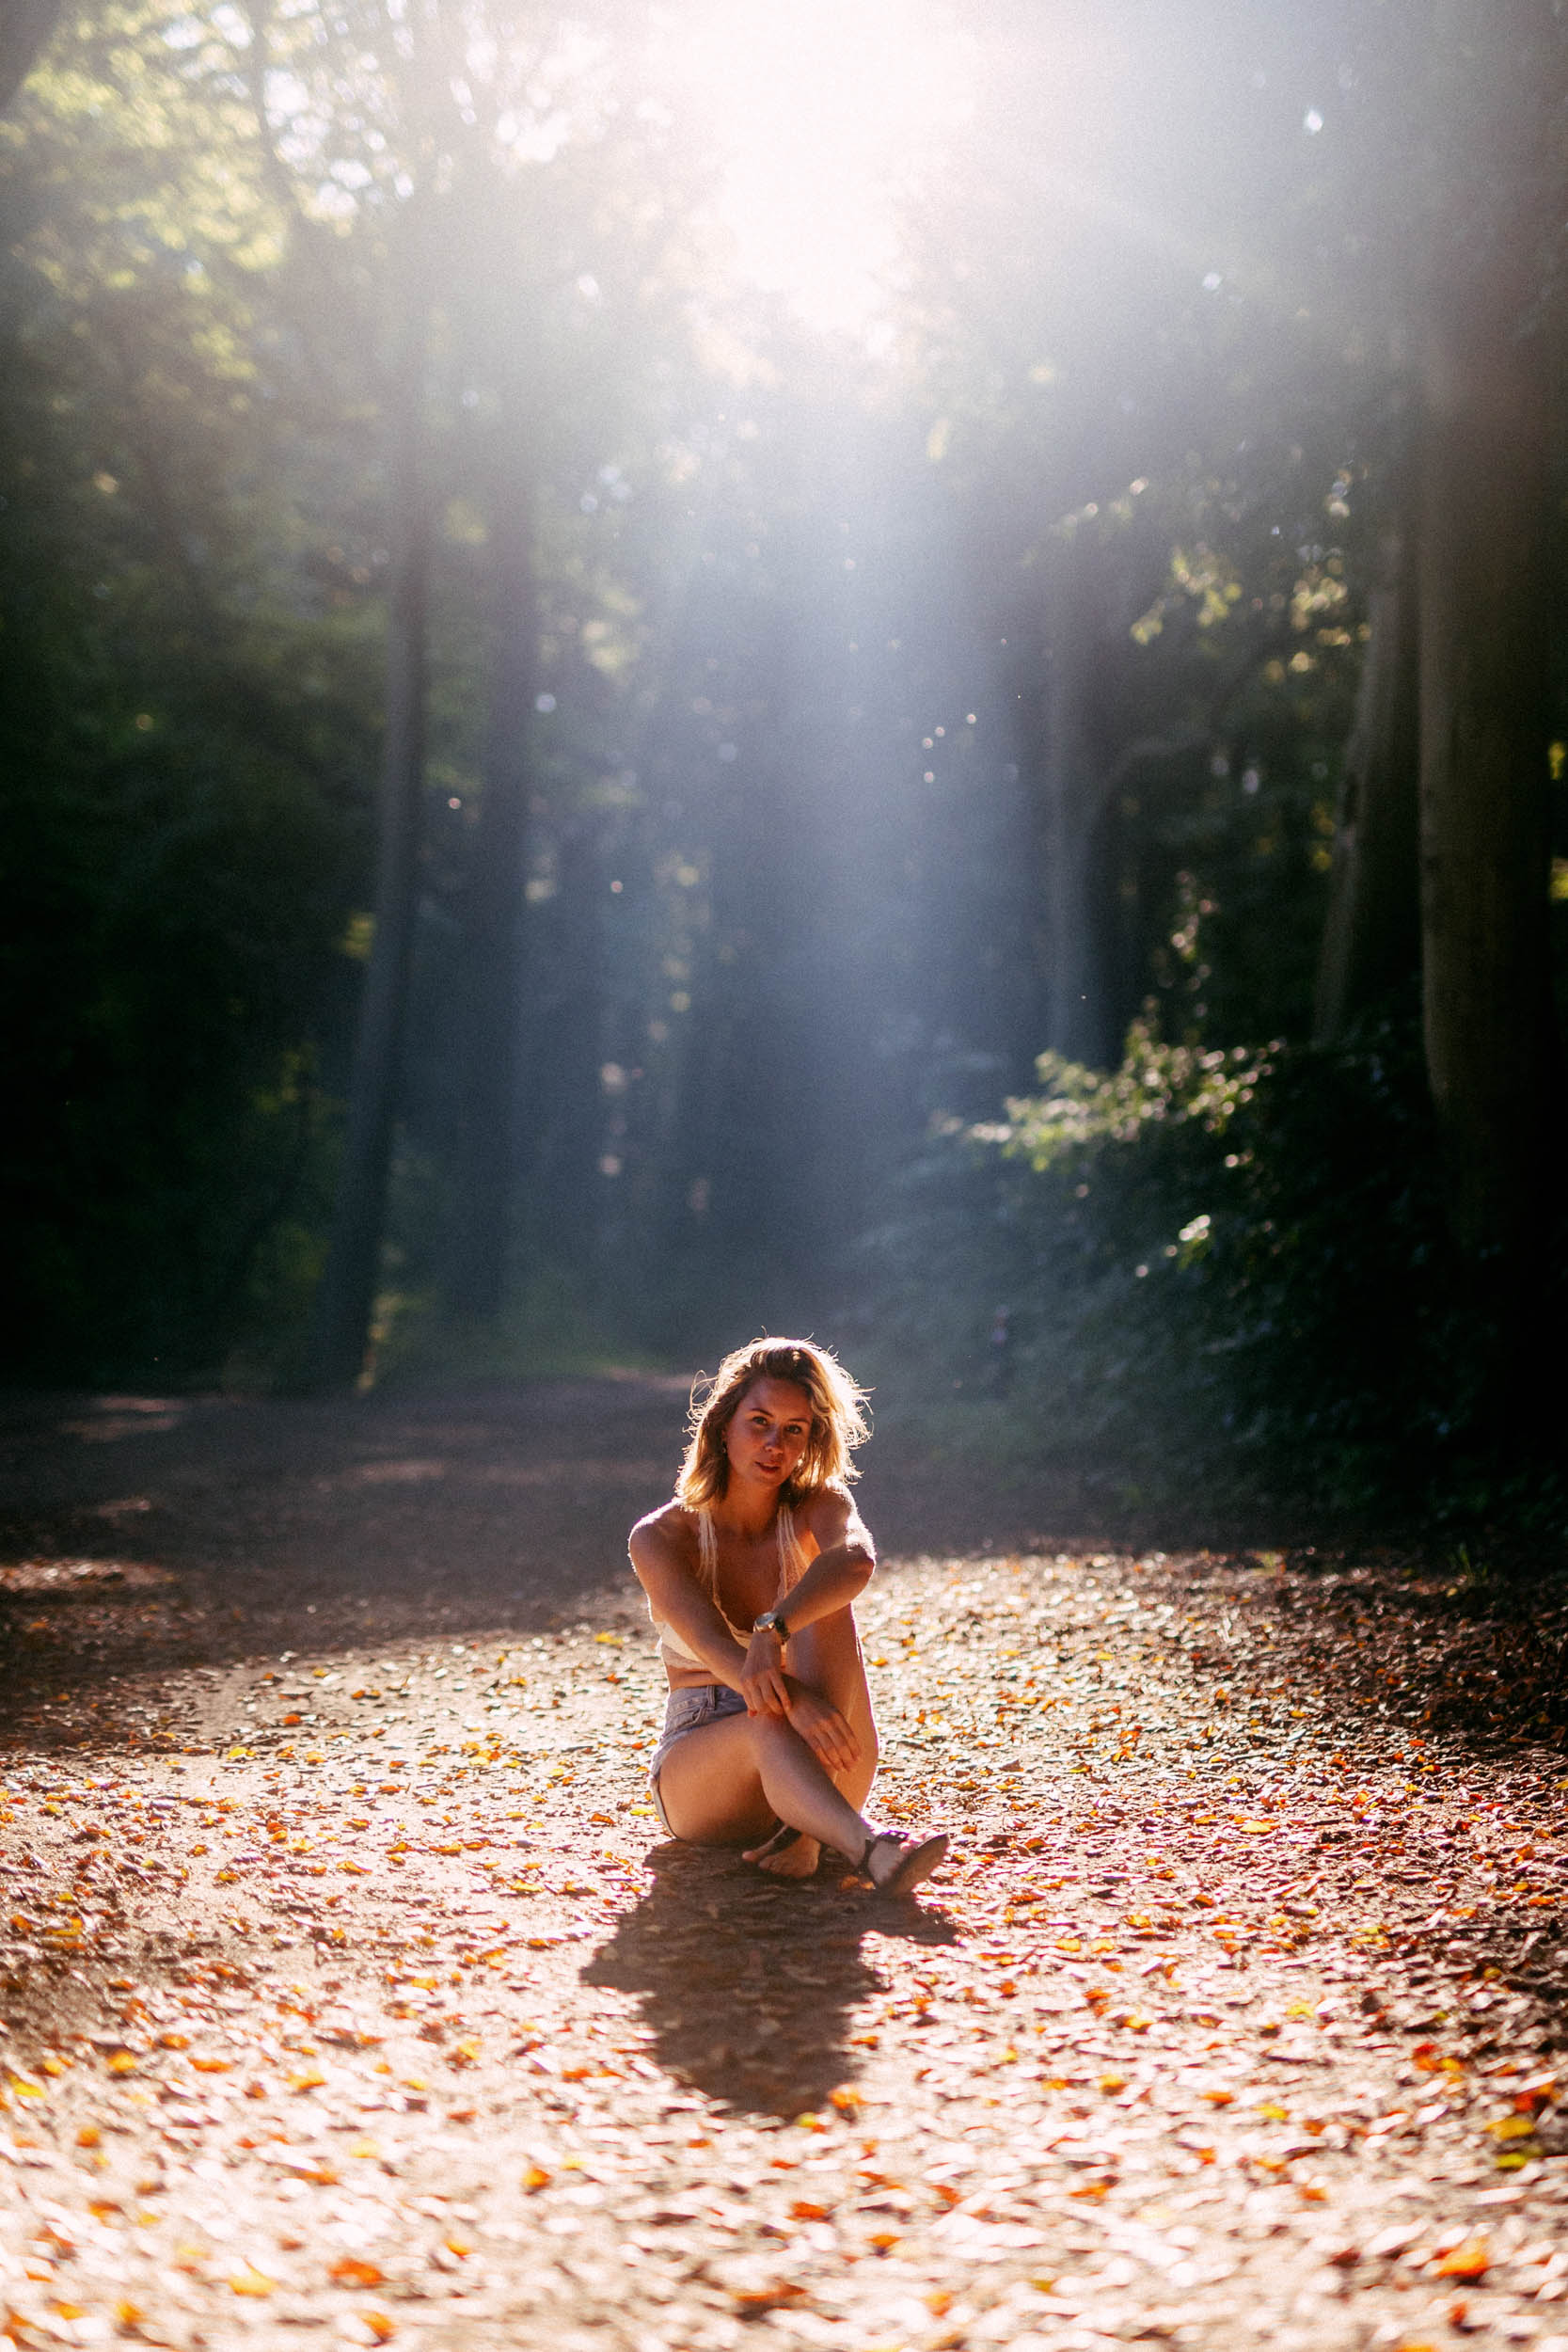 A woman sitting on the ground in a forest, captured in a beach photo.